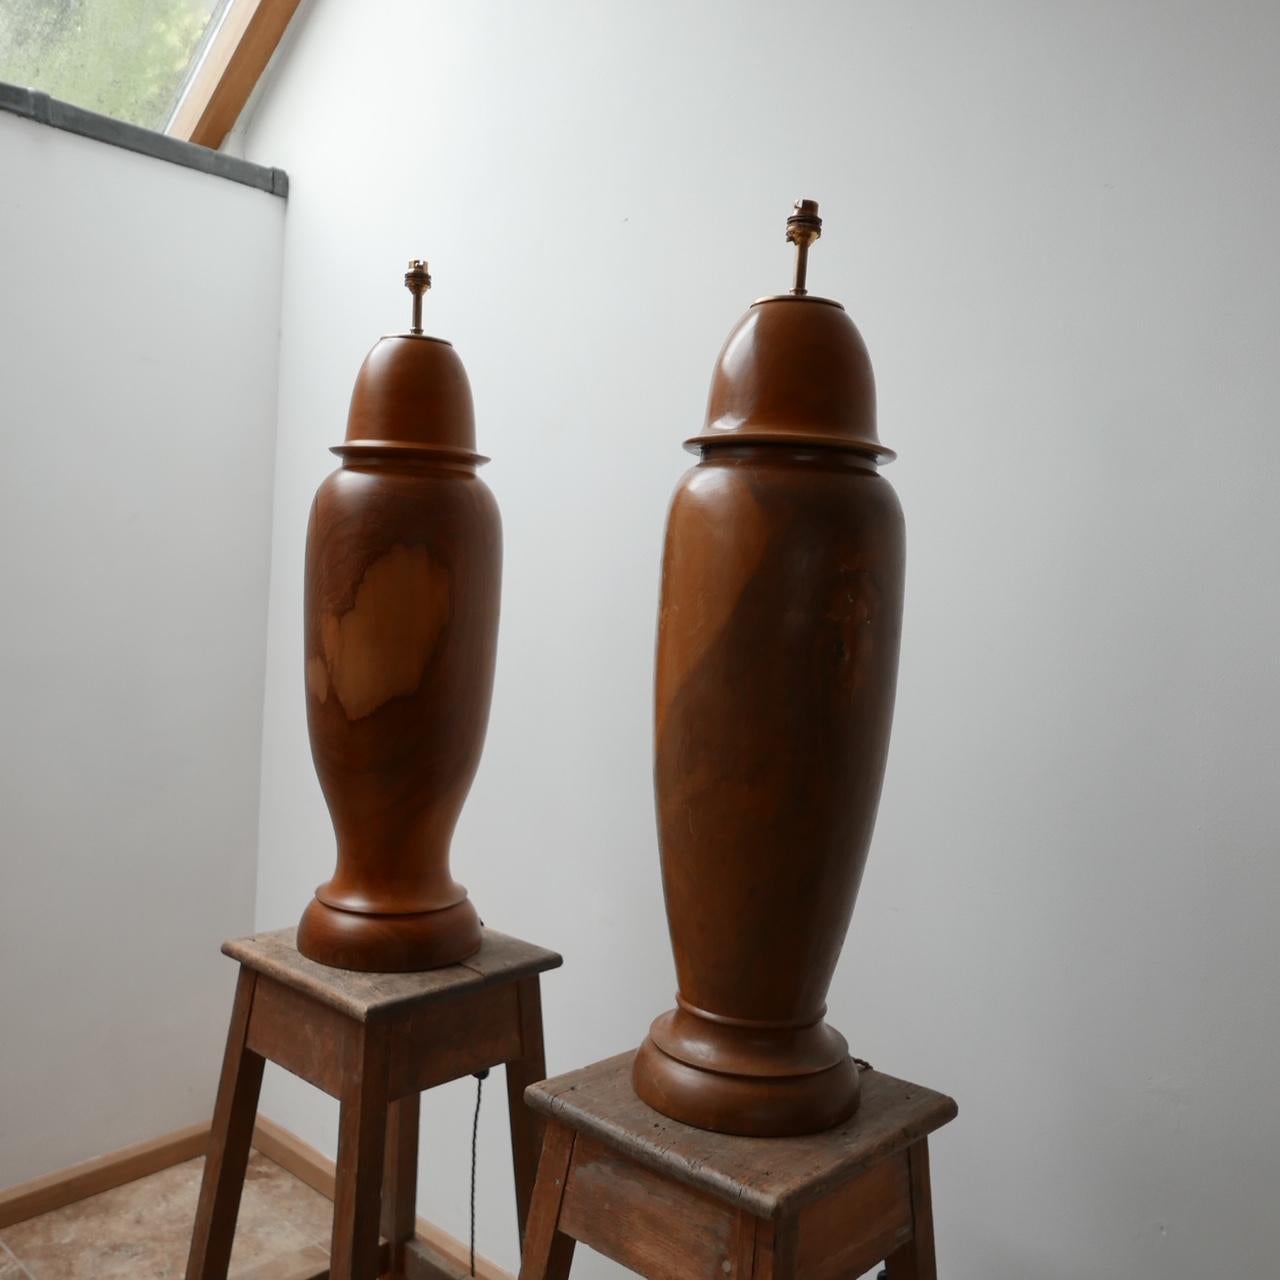 A pair of very large table lamps,

c1950s, England.

Originally the caps came off, although we were unsure of original use but they have been professional converted into table lamps. 

Re-wired with gold silk flex. 

These would sit well in